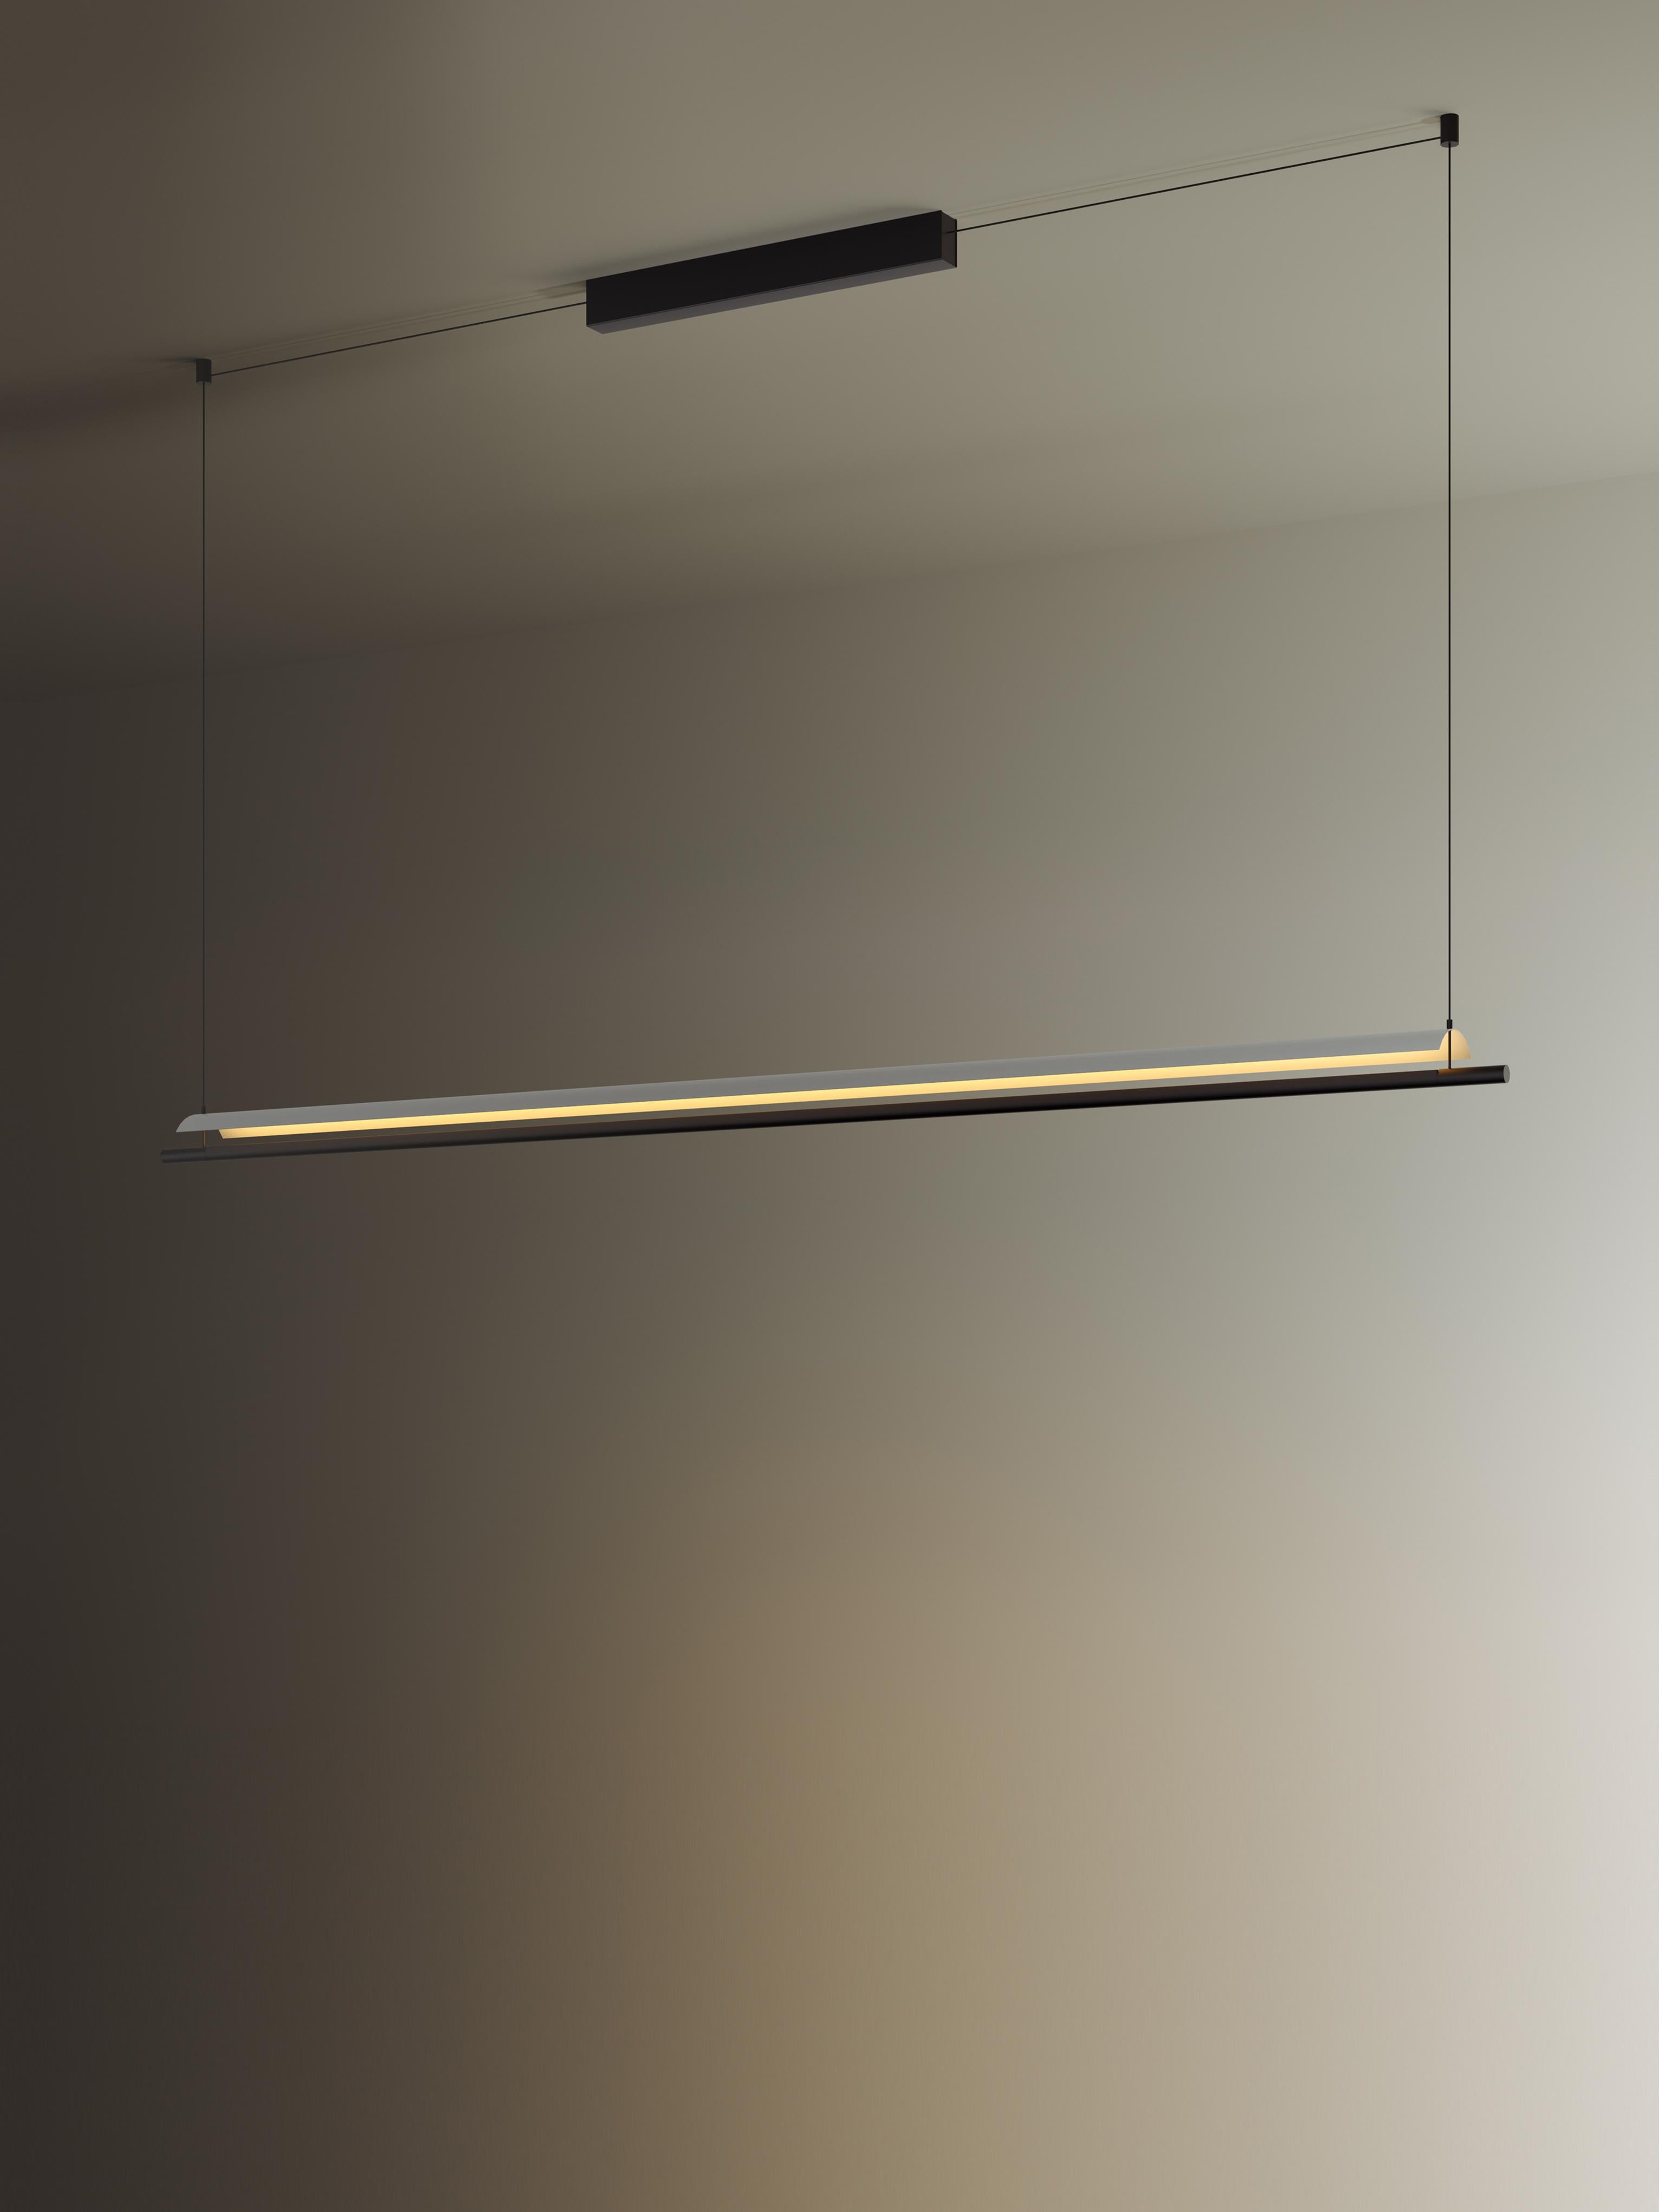 Lámina 165 pendant lamp by Antoni Arola
Dimensions: d 179.8 x w 9.15 x h 4 cm
Materials: Metal, plastic.
Available in other sizes.

A line of light and a thin metal sheet create a soft but effective levity. A marriage of the poetic and the